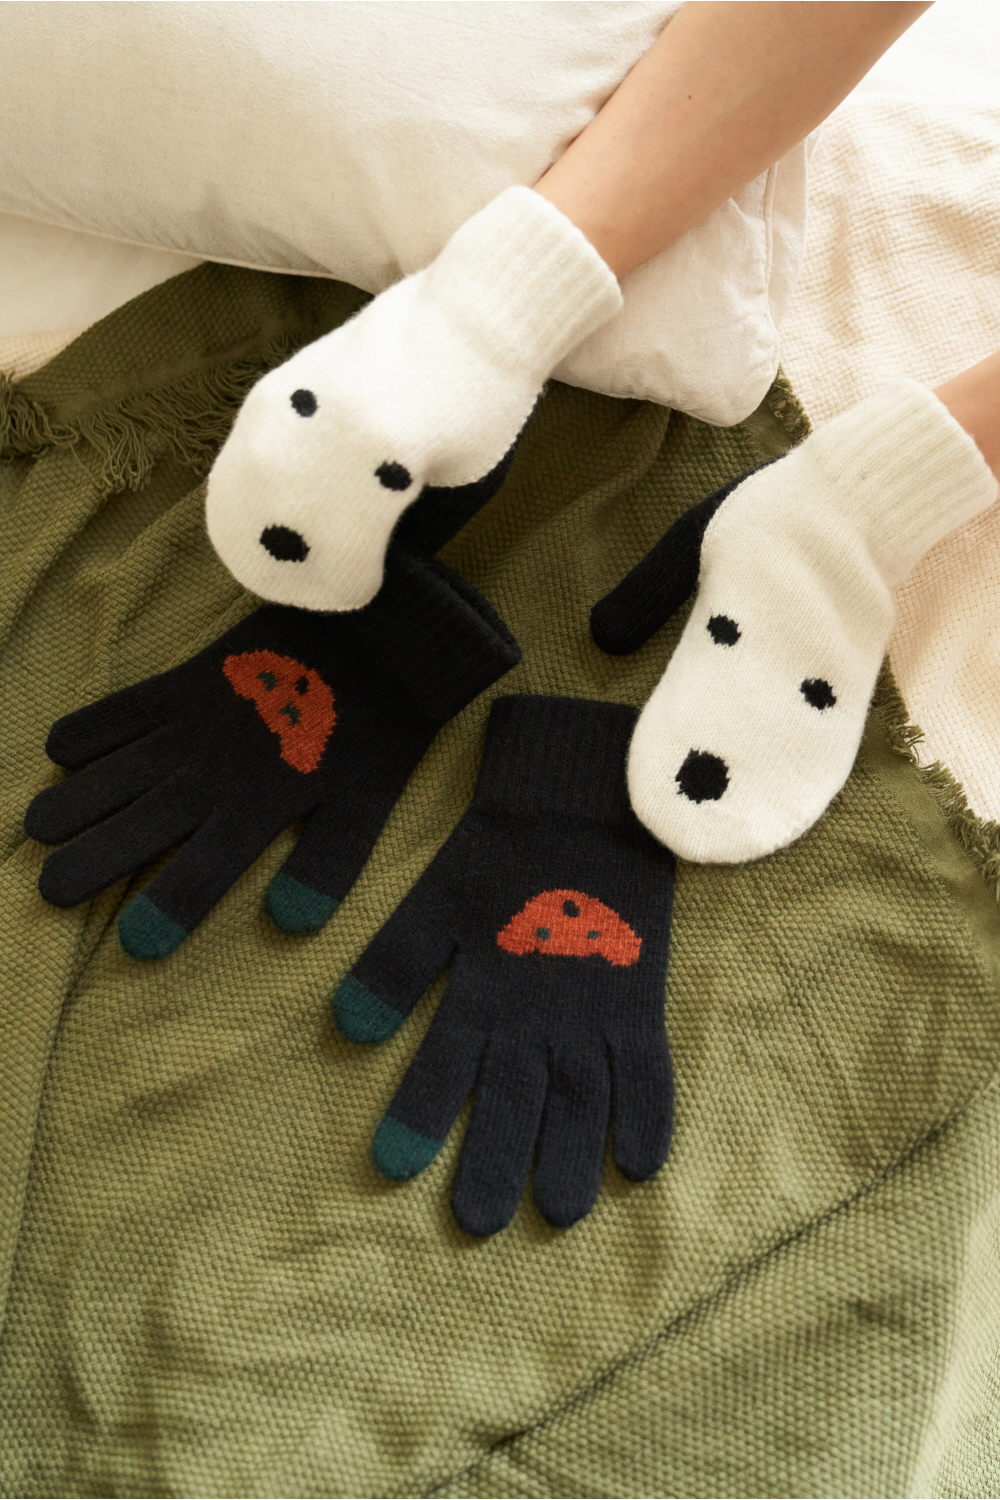 gloves product image-S1L4